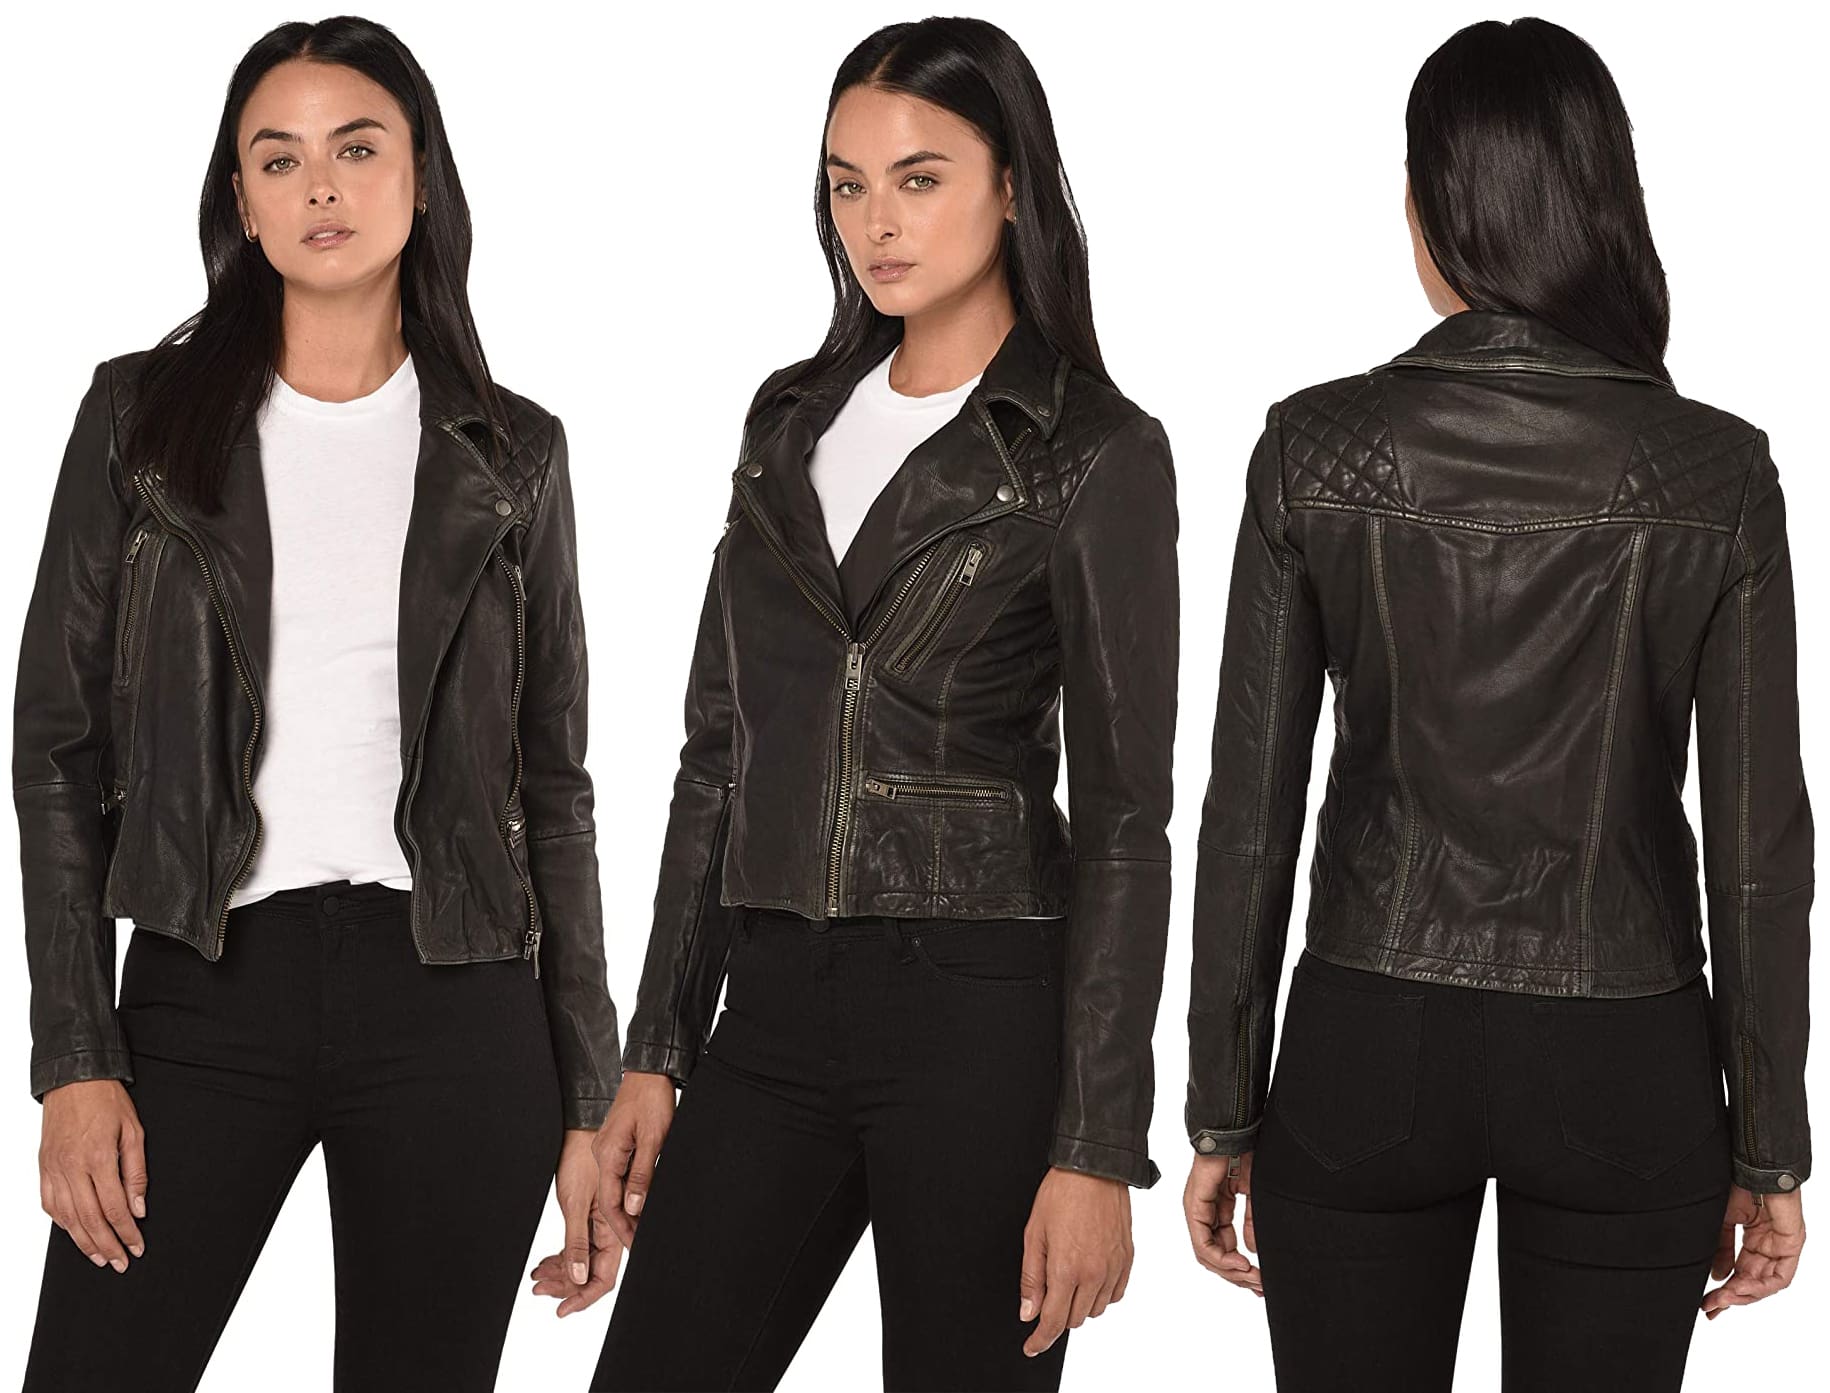 Fall fashion icon: All Saints' cargo biker leather jacket, exquisitely crafted with quilted detailing and tailored seams